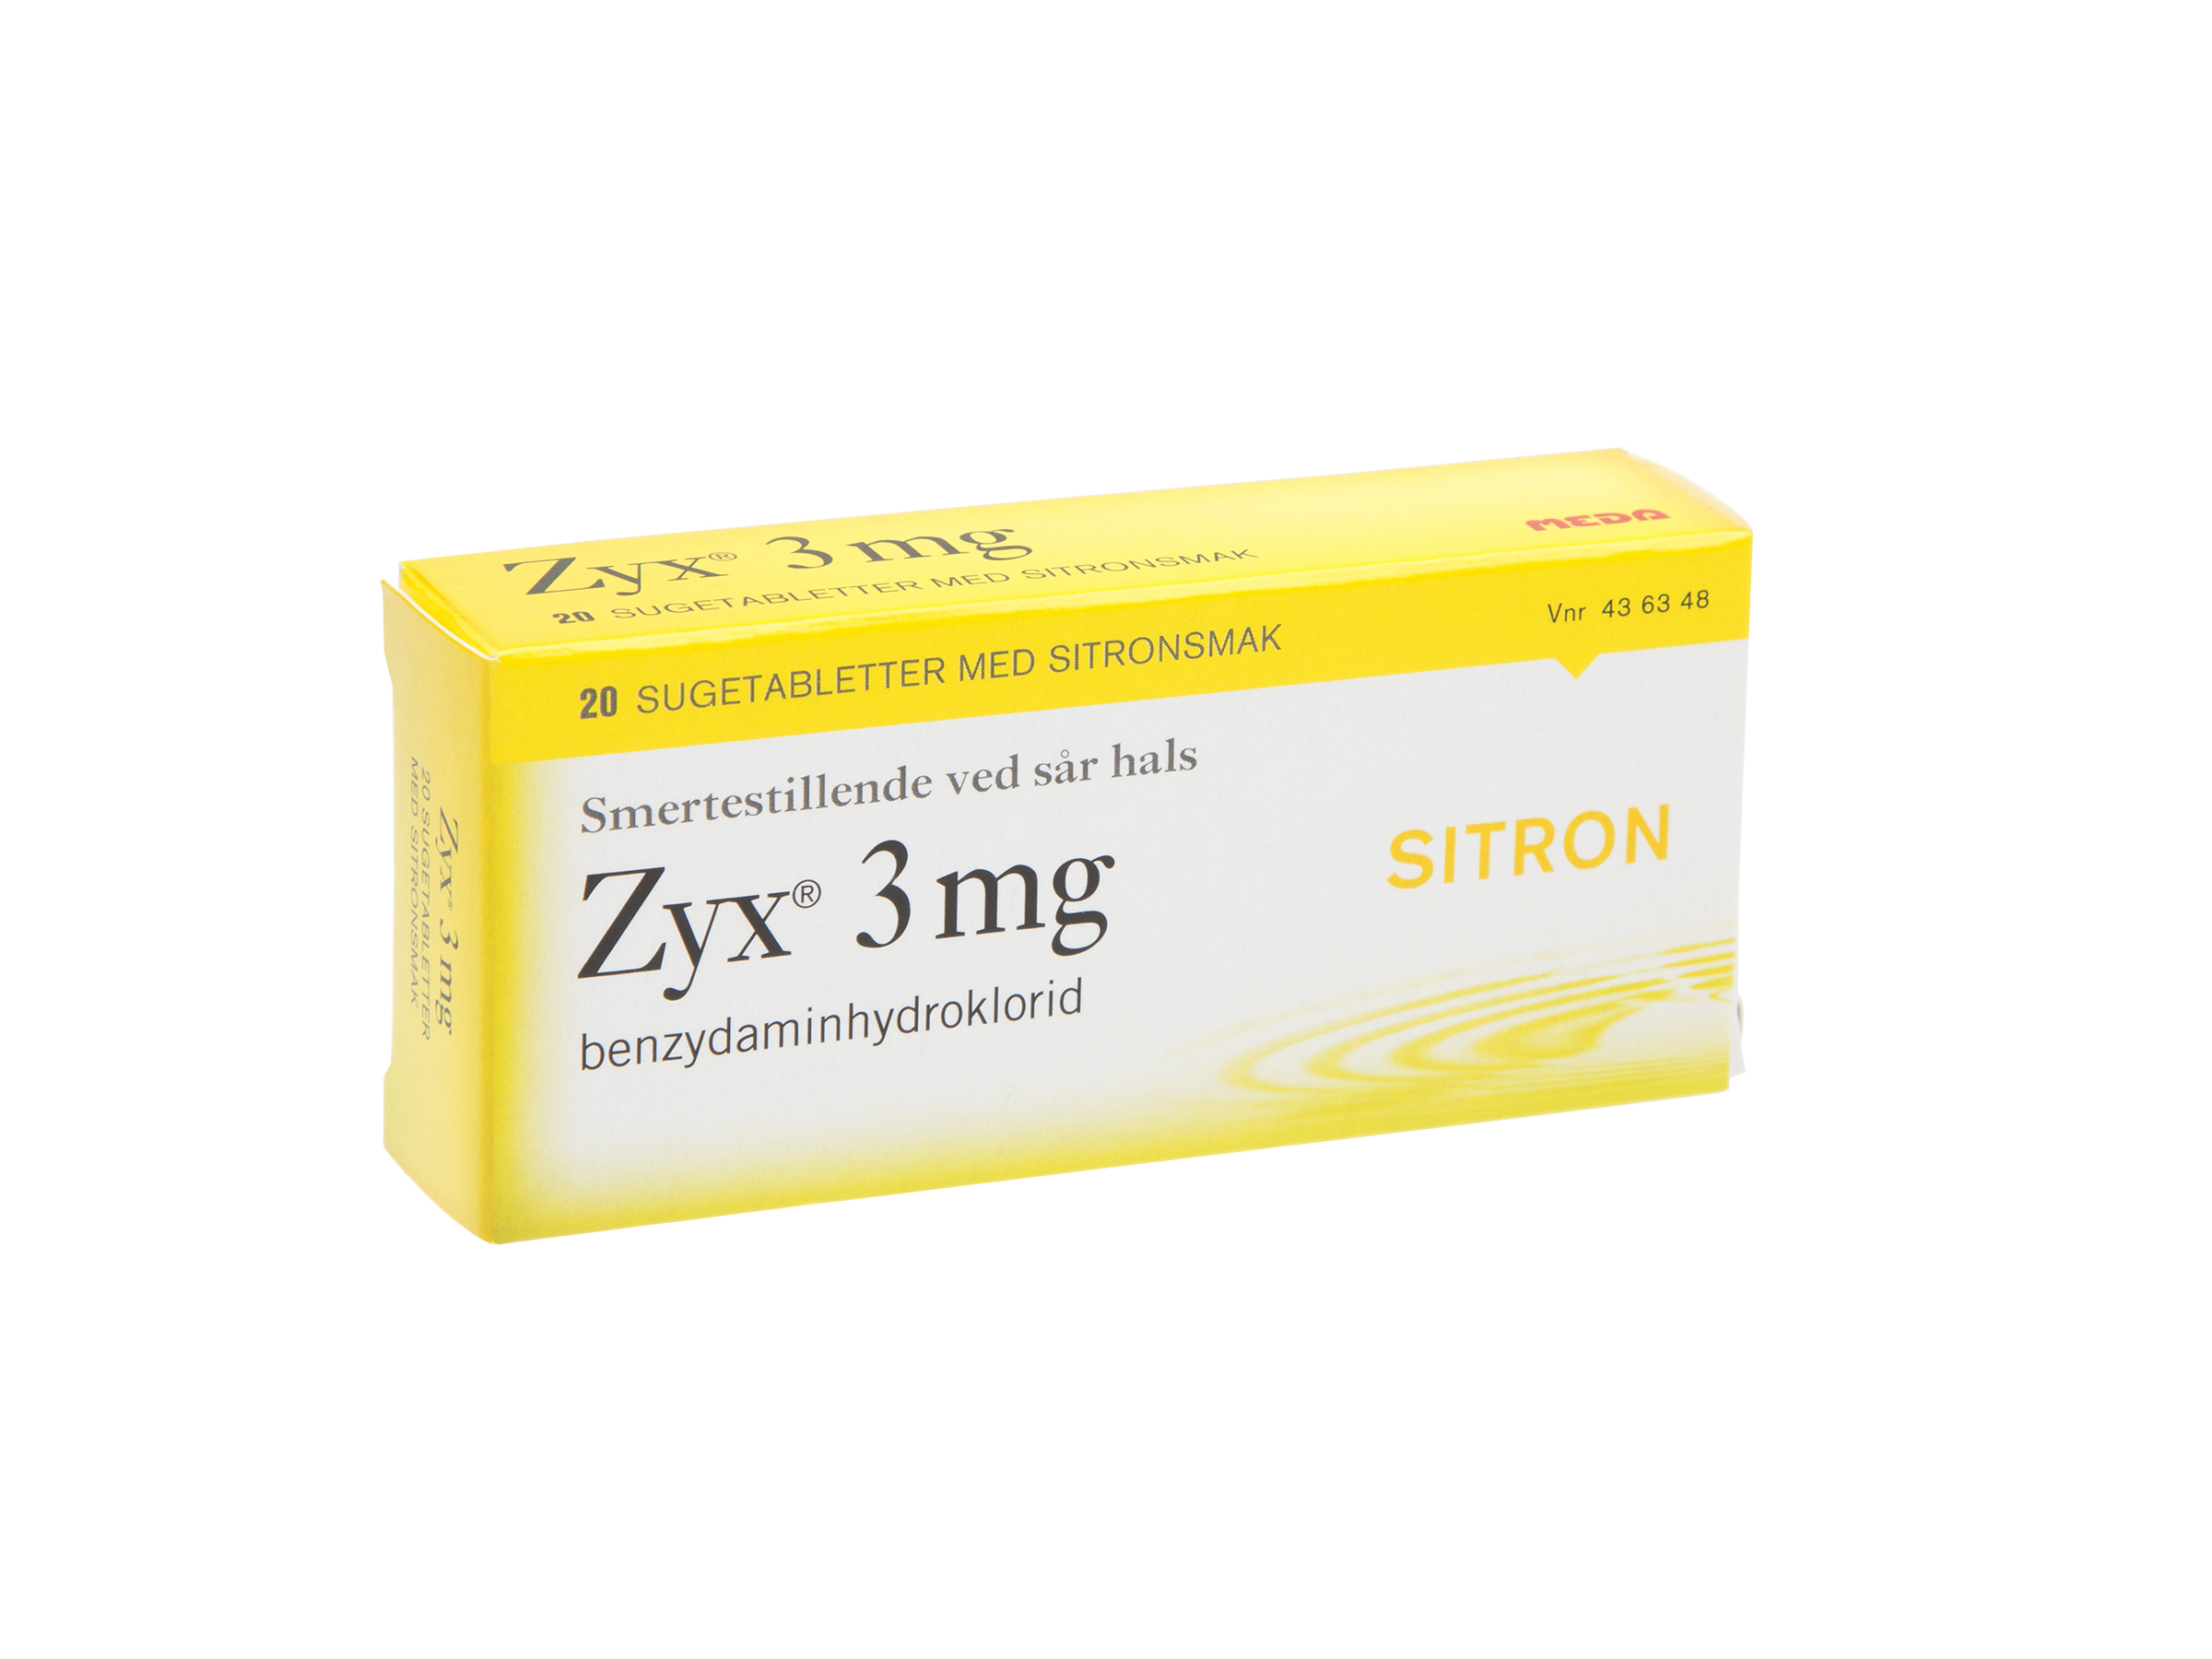 Zyx 3 mg sitron sugetabletter, 2 x 10 stk.